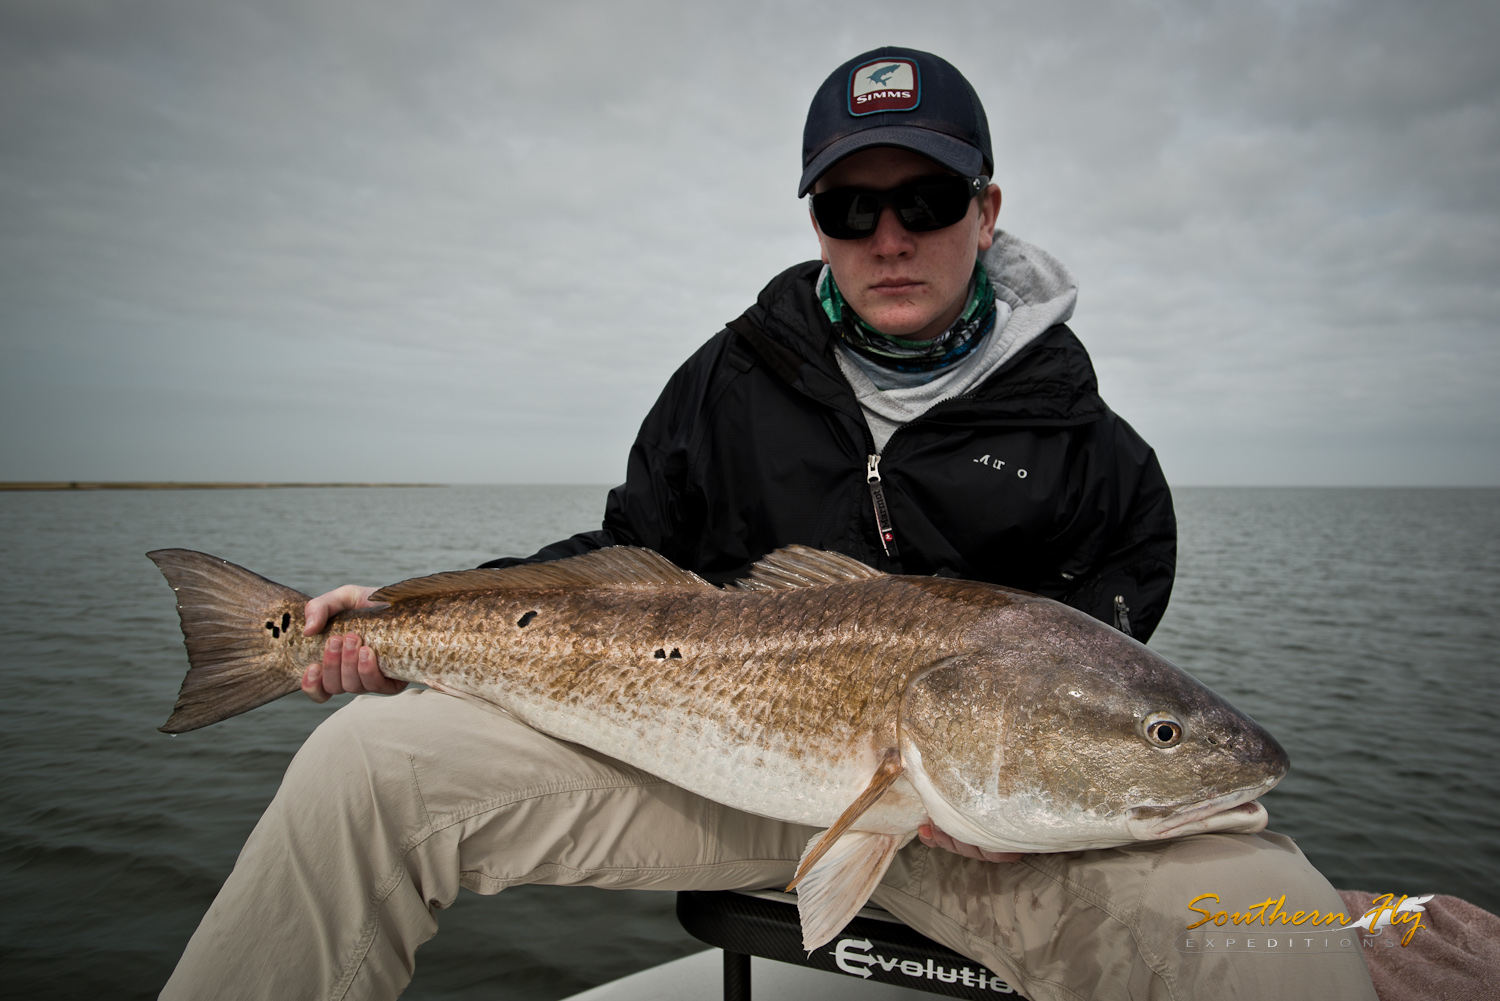 2019-03-08-09_SouthernFlyExpeditions_NewOrleans_TimFrank&Carson-3.jpg